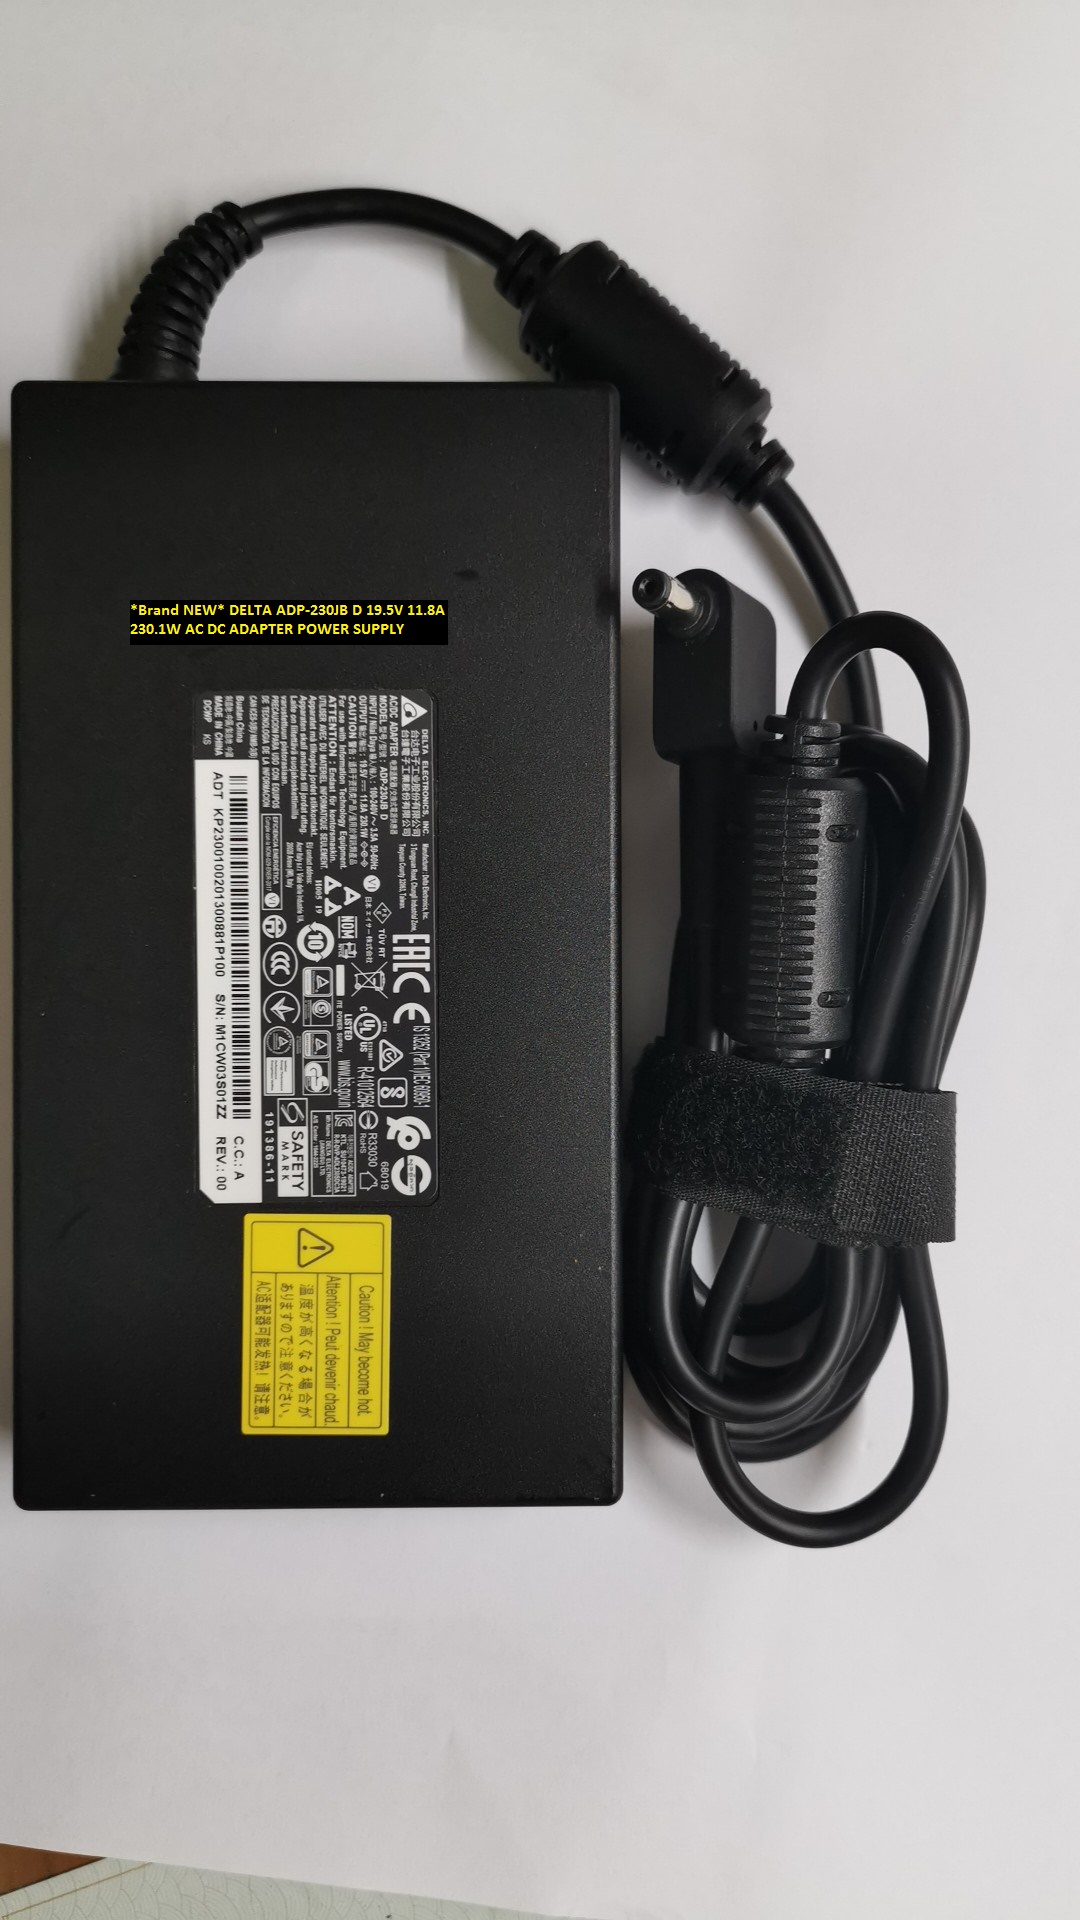 *Brand NEW* DELTA ADP-230JB D 19.5V 11.8A 230.1W AC DC ADAPTER POWER SUPPLY